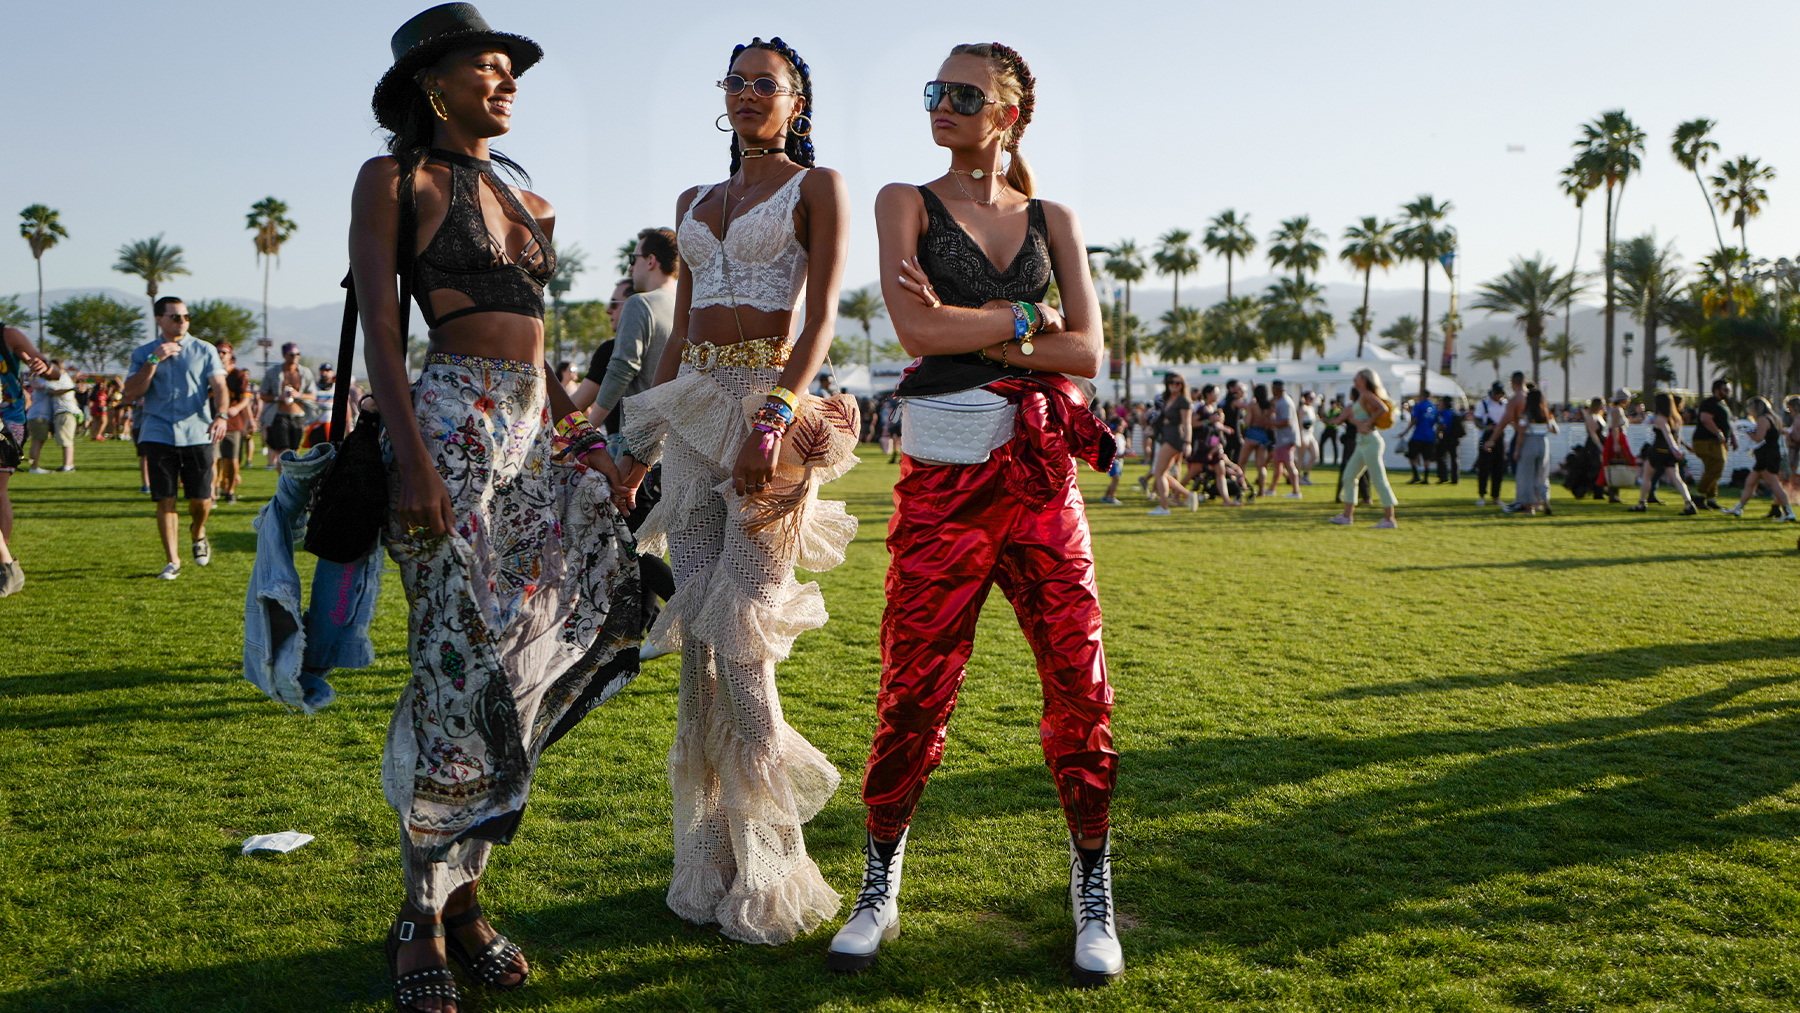 It's the End of Festival Fashion as We Know It